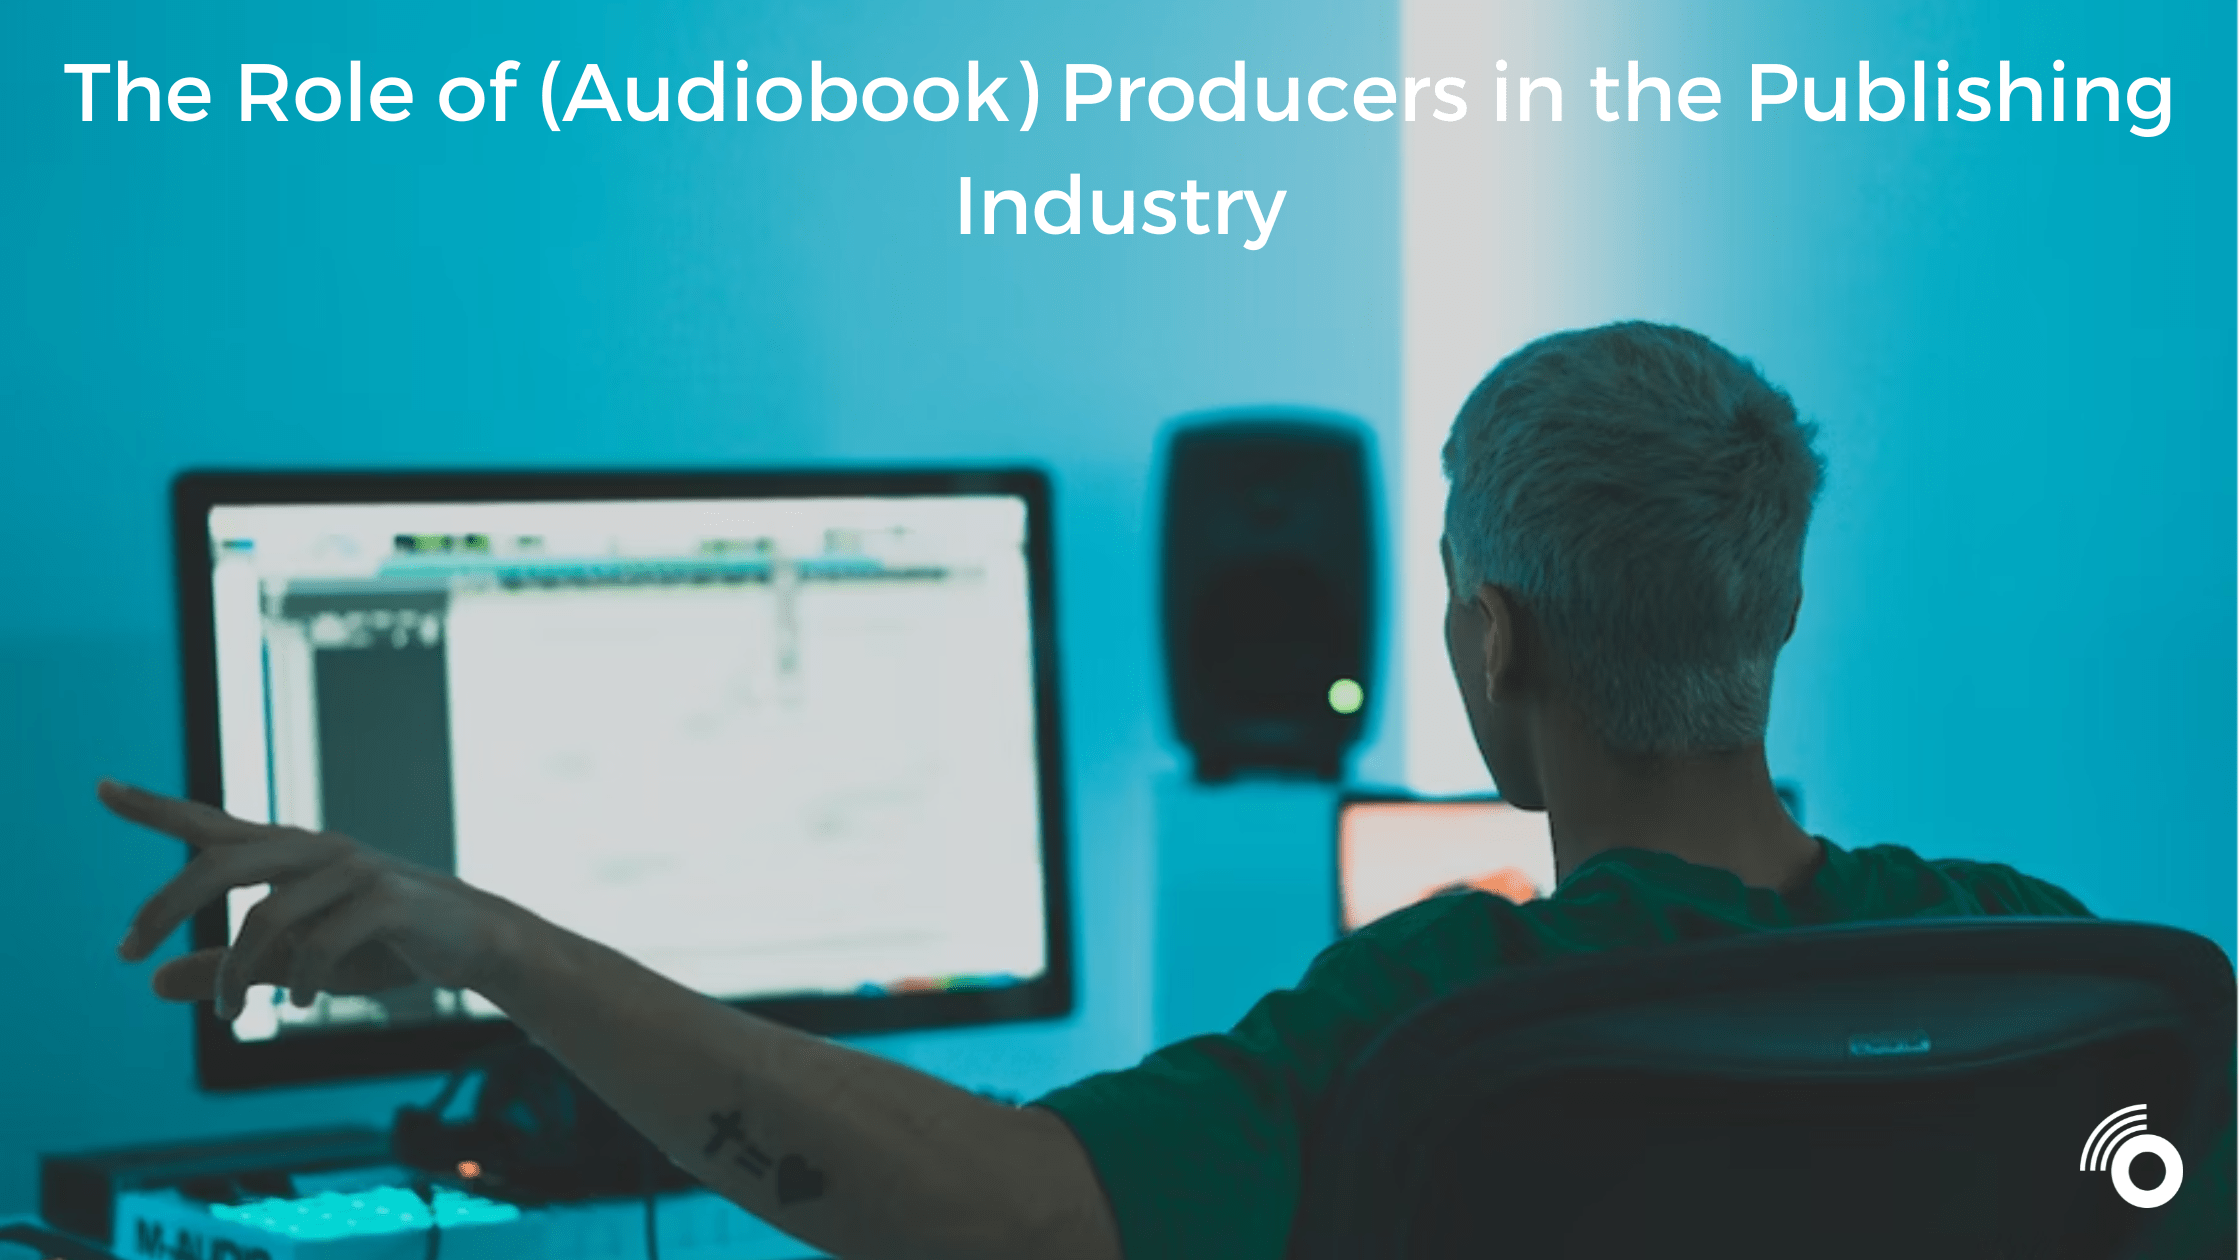 The Role of (Audiobook) Producers in the Publishing Industry